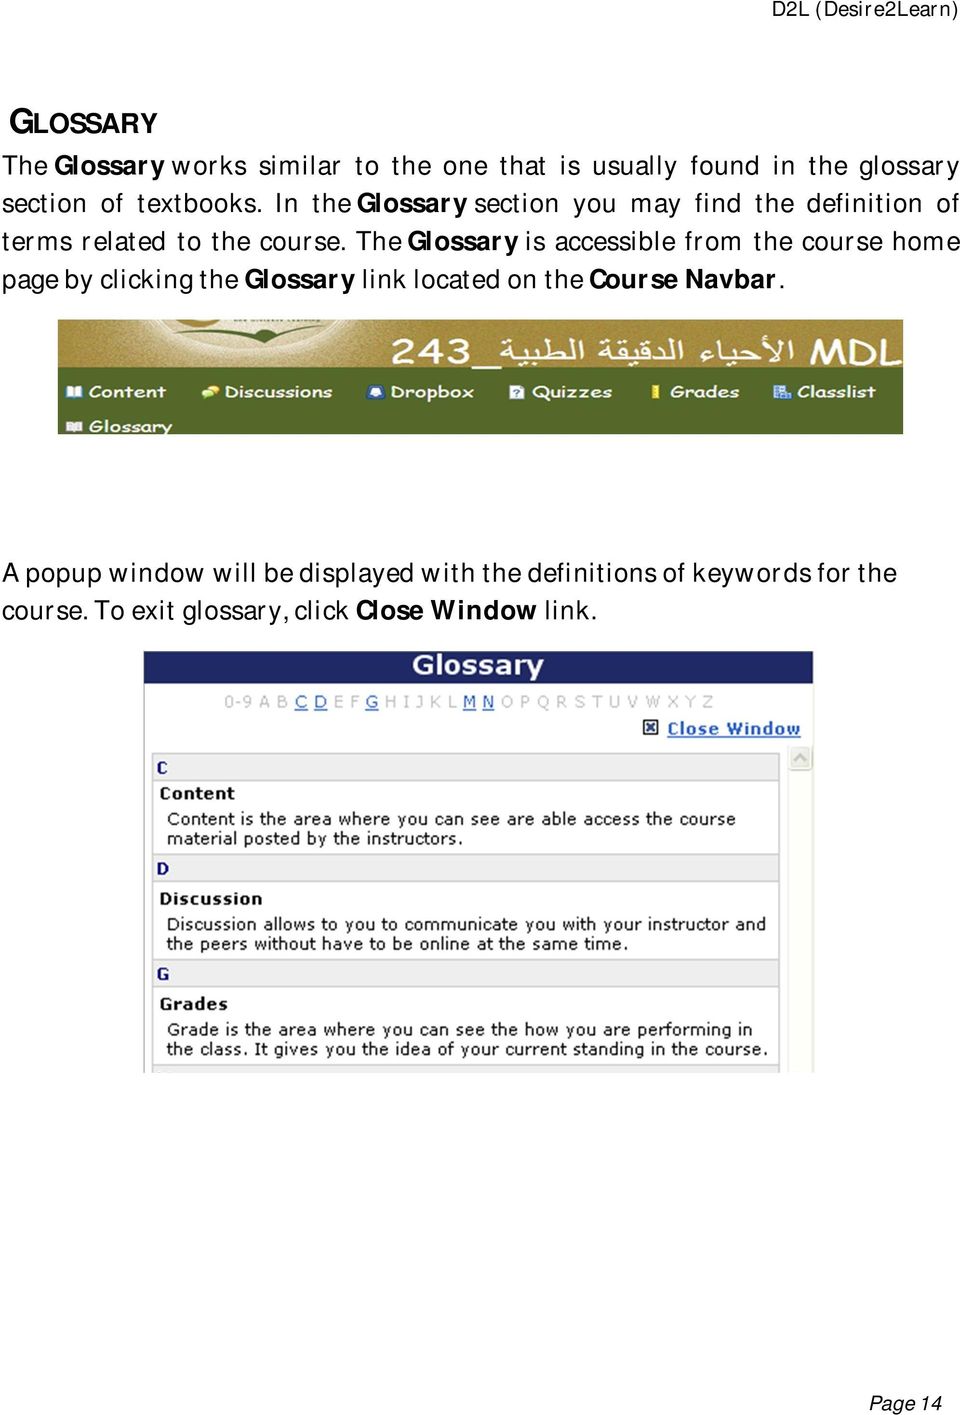 The Glossary is accessible from the course home page by clicking the Glossary link located on the Course